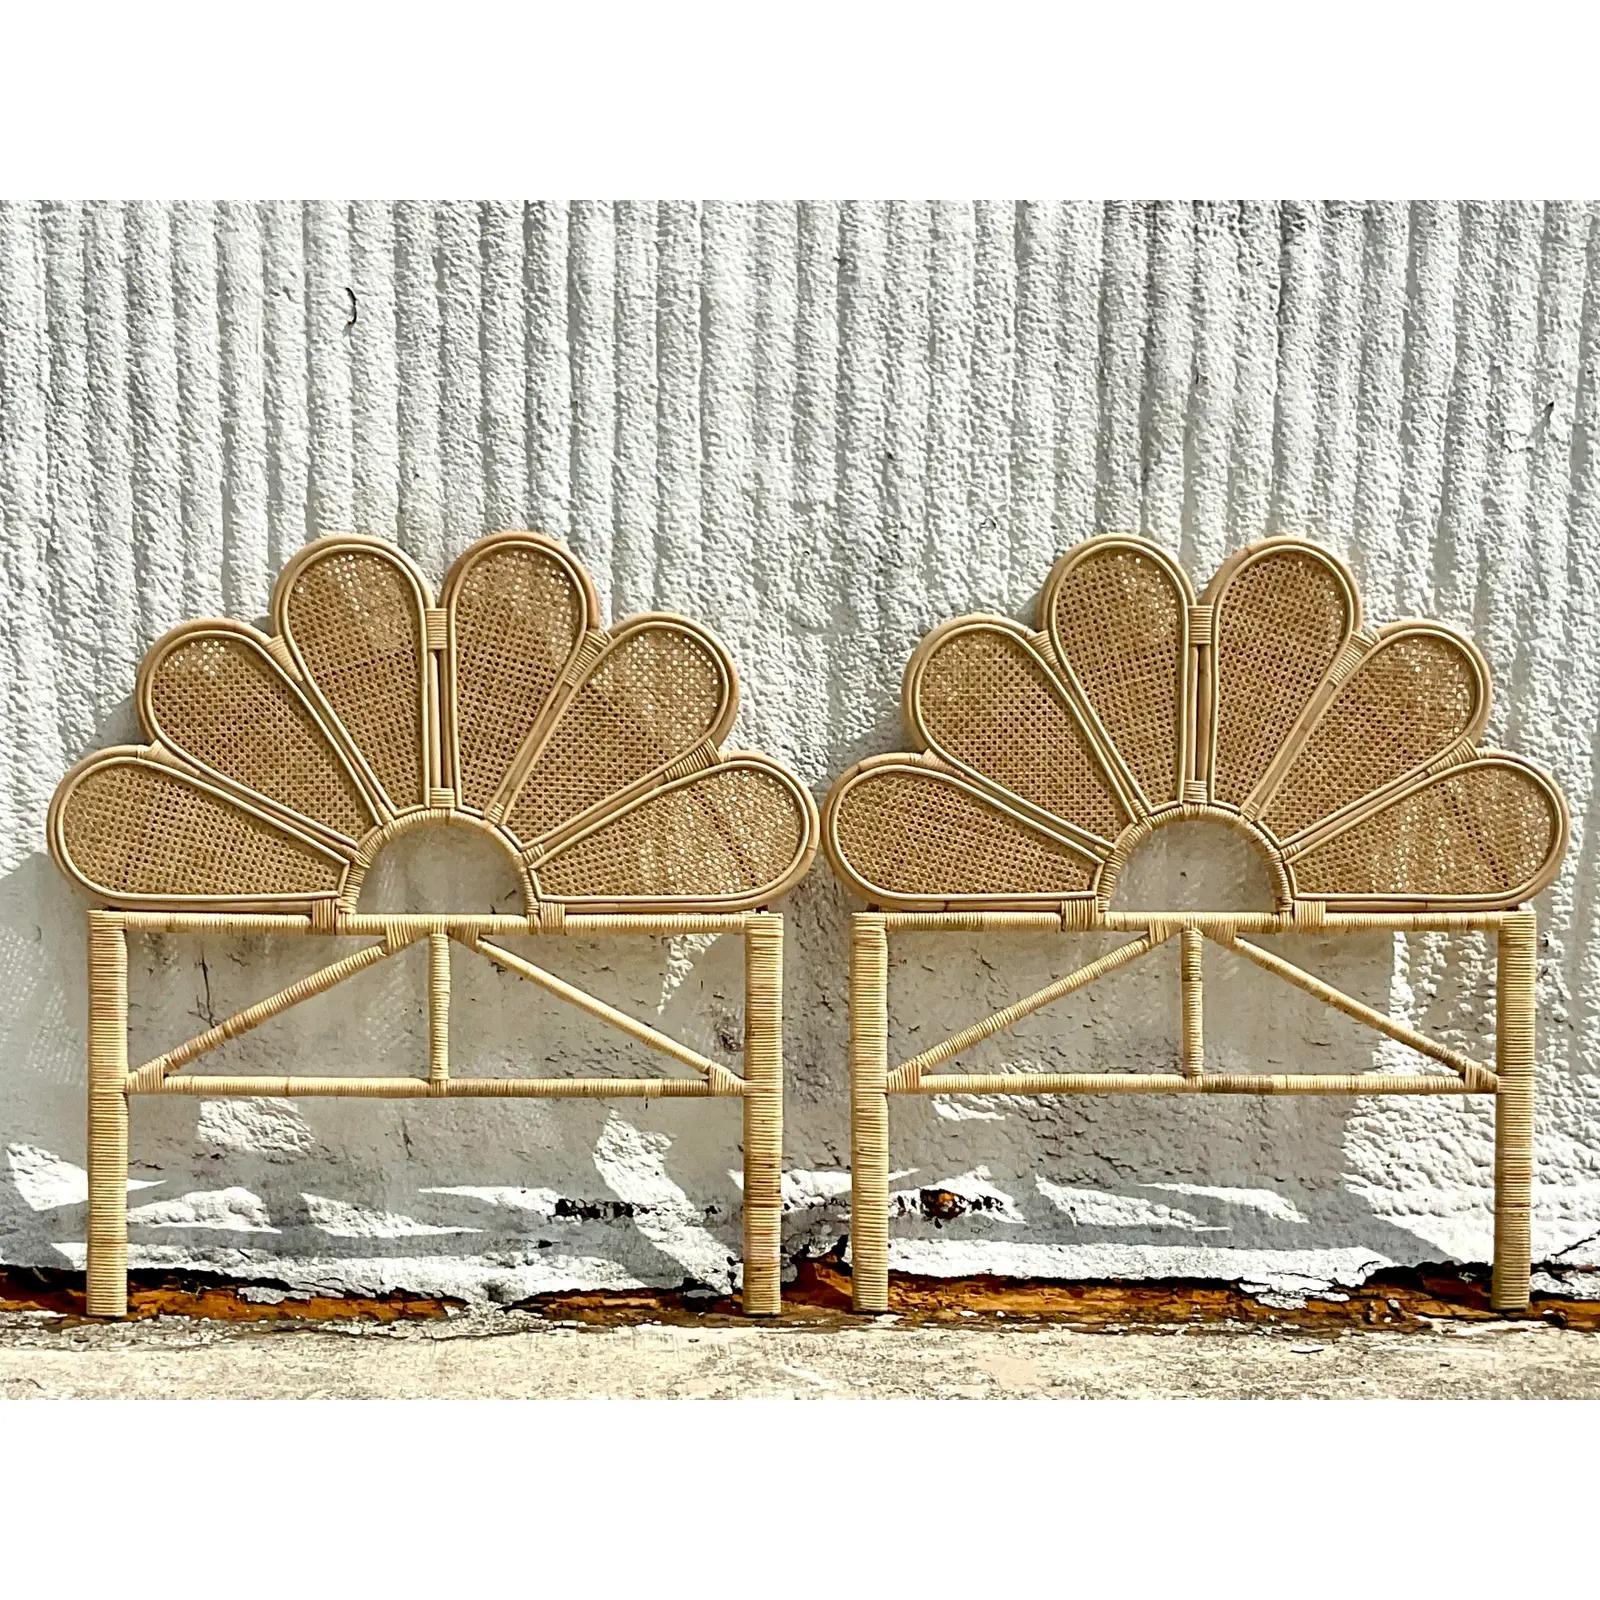 A fantastic pair of Coastal twin headboards. Beautiful bent scalloped rattan with inset cane panels. Acquired from a Palm Beach estate.